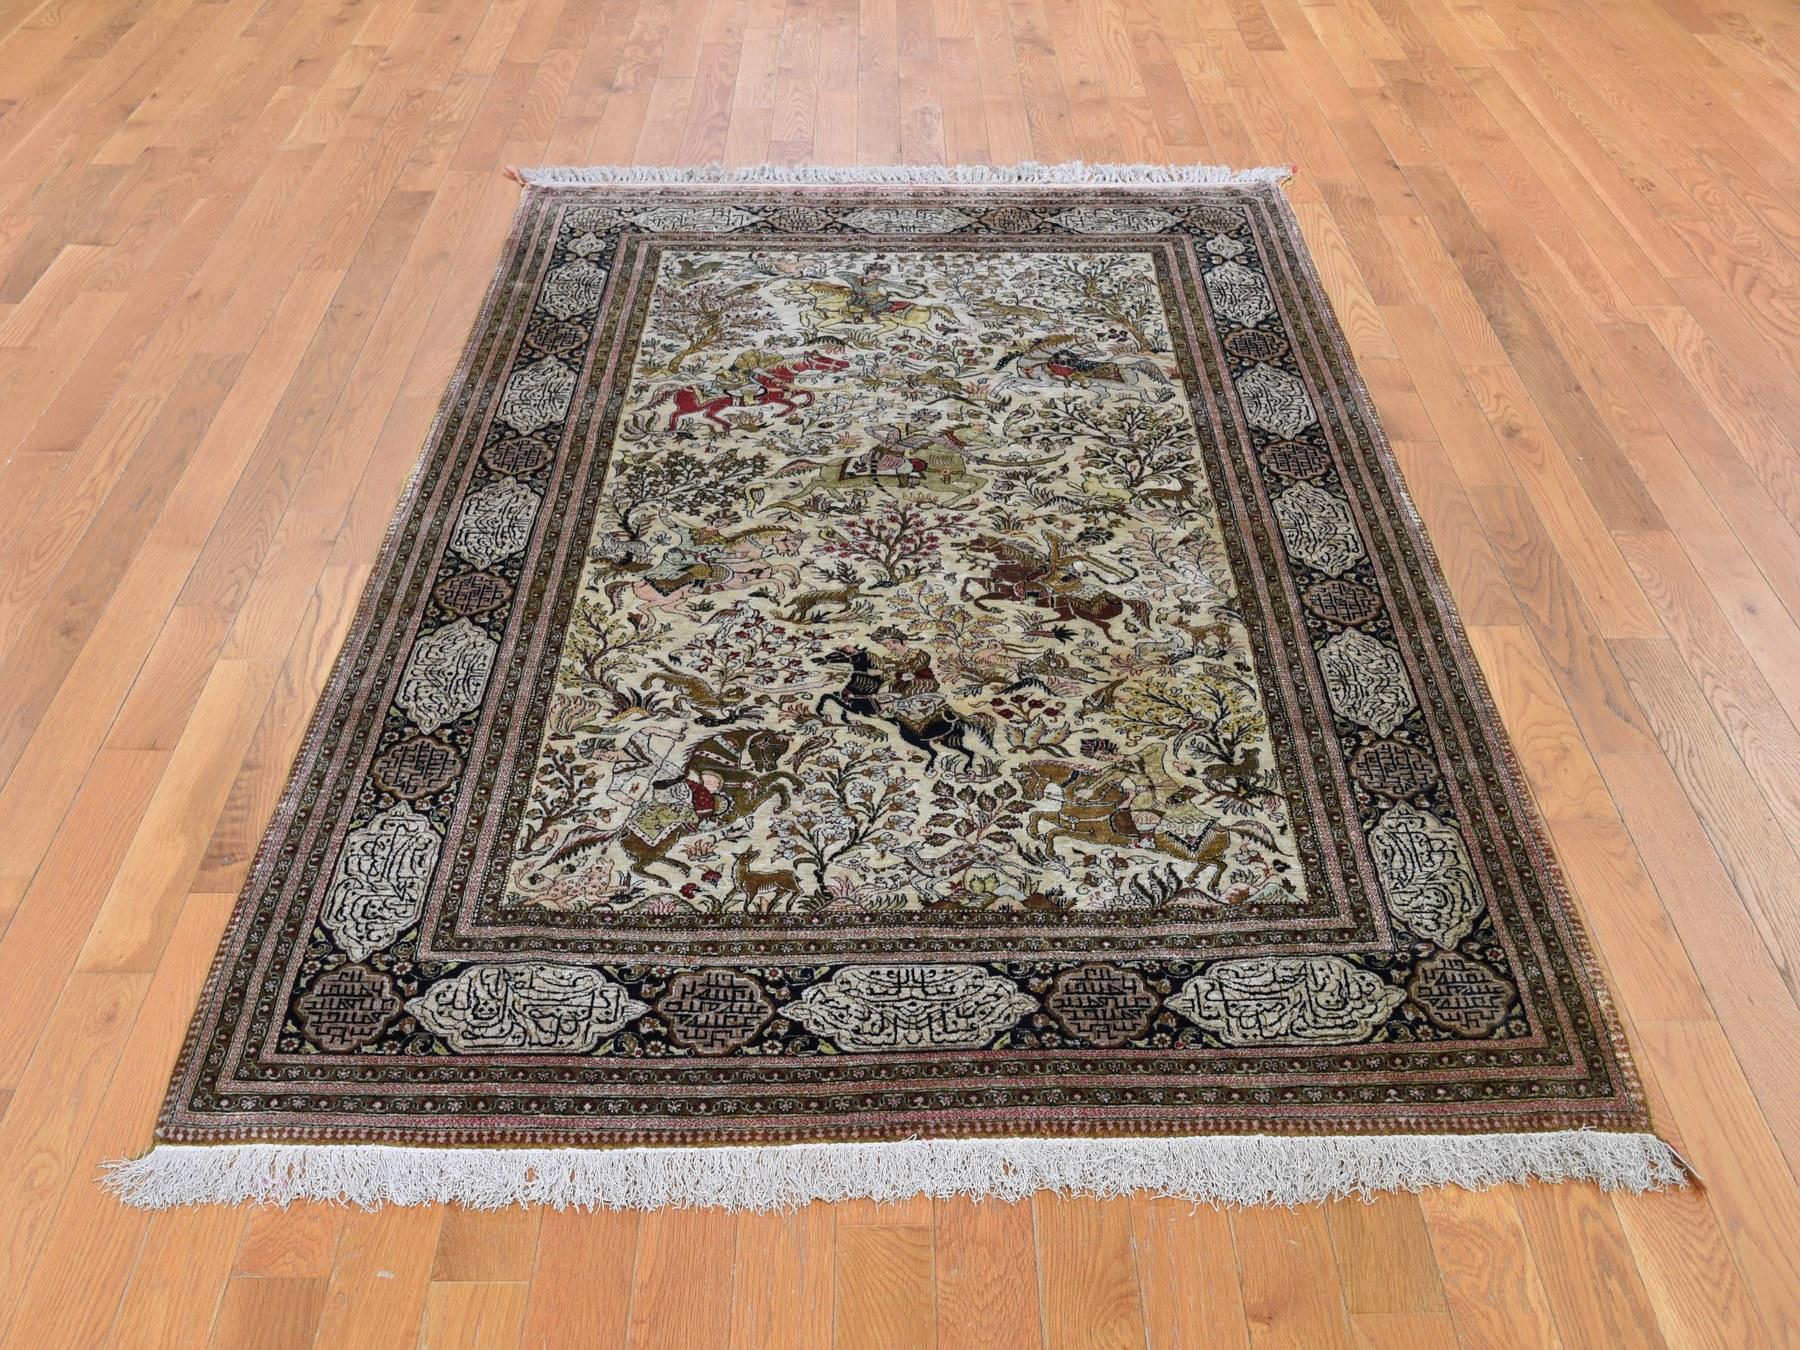 This is a truly genuine one-of-a-kind Ivory vintage Persian Qum 500 KPSI Hunting Design, poetry hand knotted rug. It has been knotted for months and months in the centuries-old Persian weaving craftsmanship techniques by expert artisans.

Primary